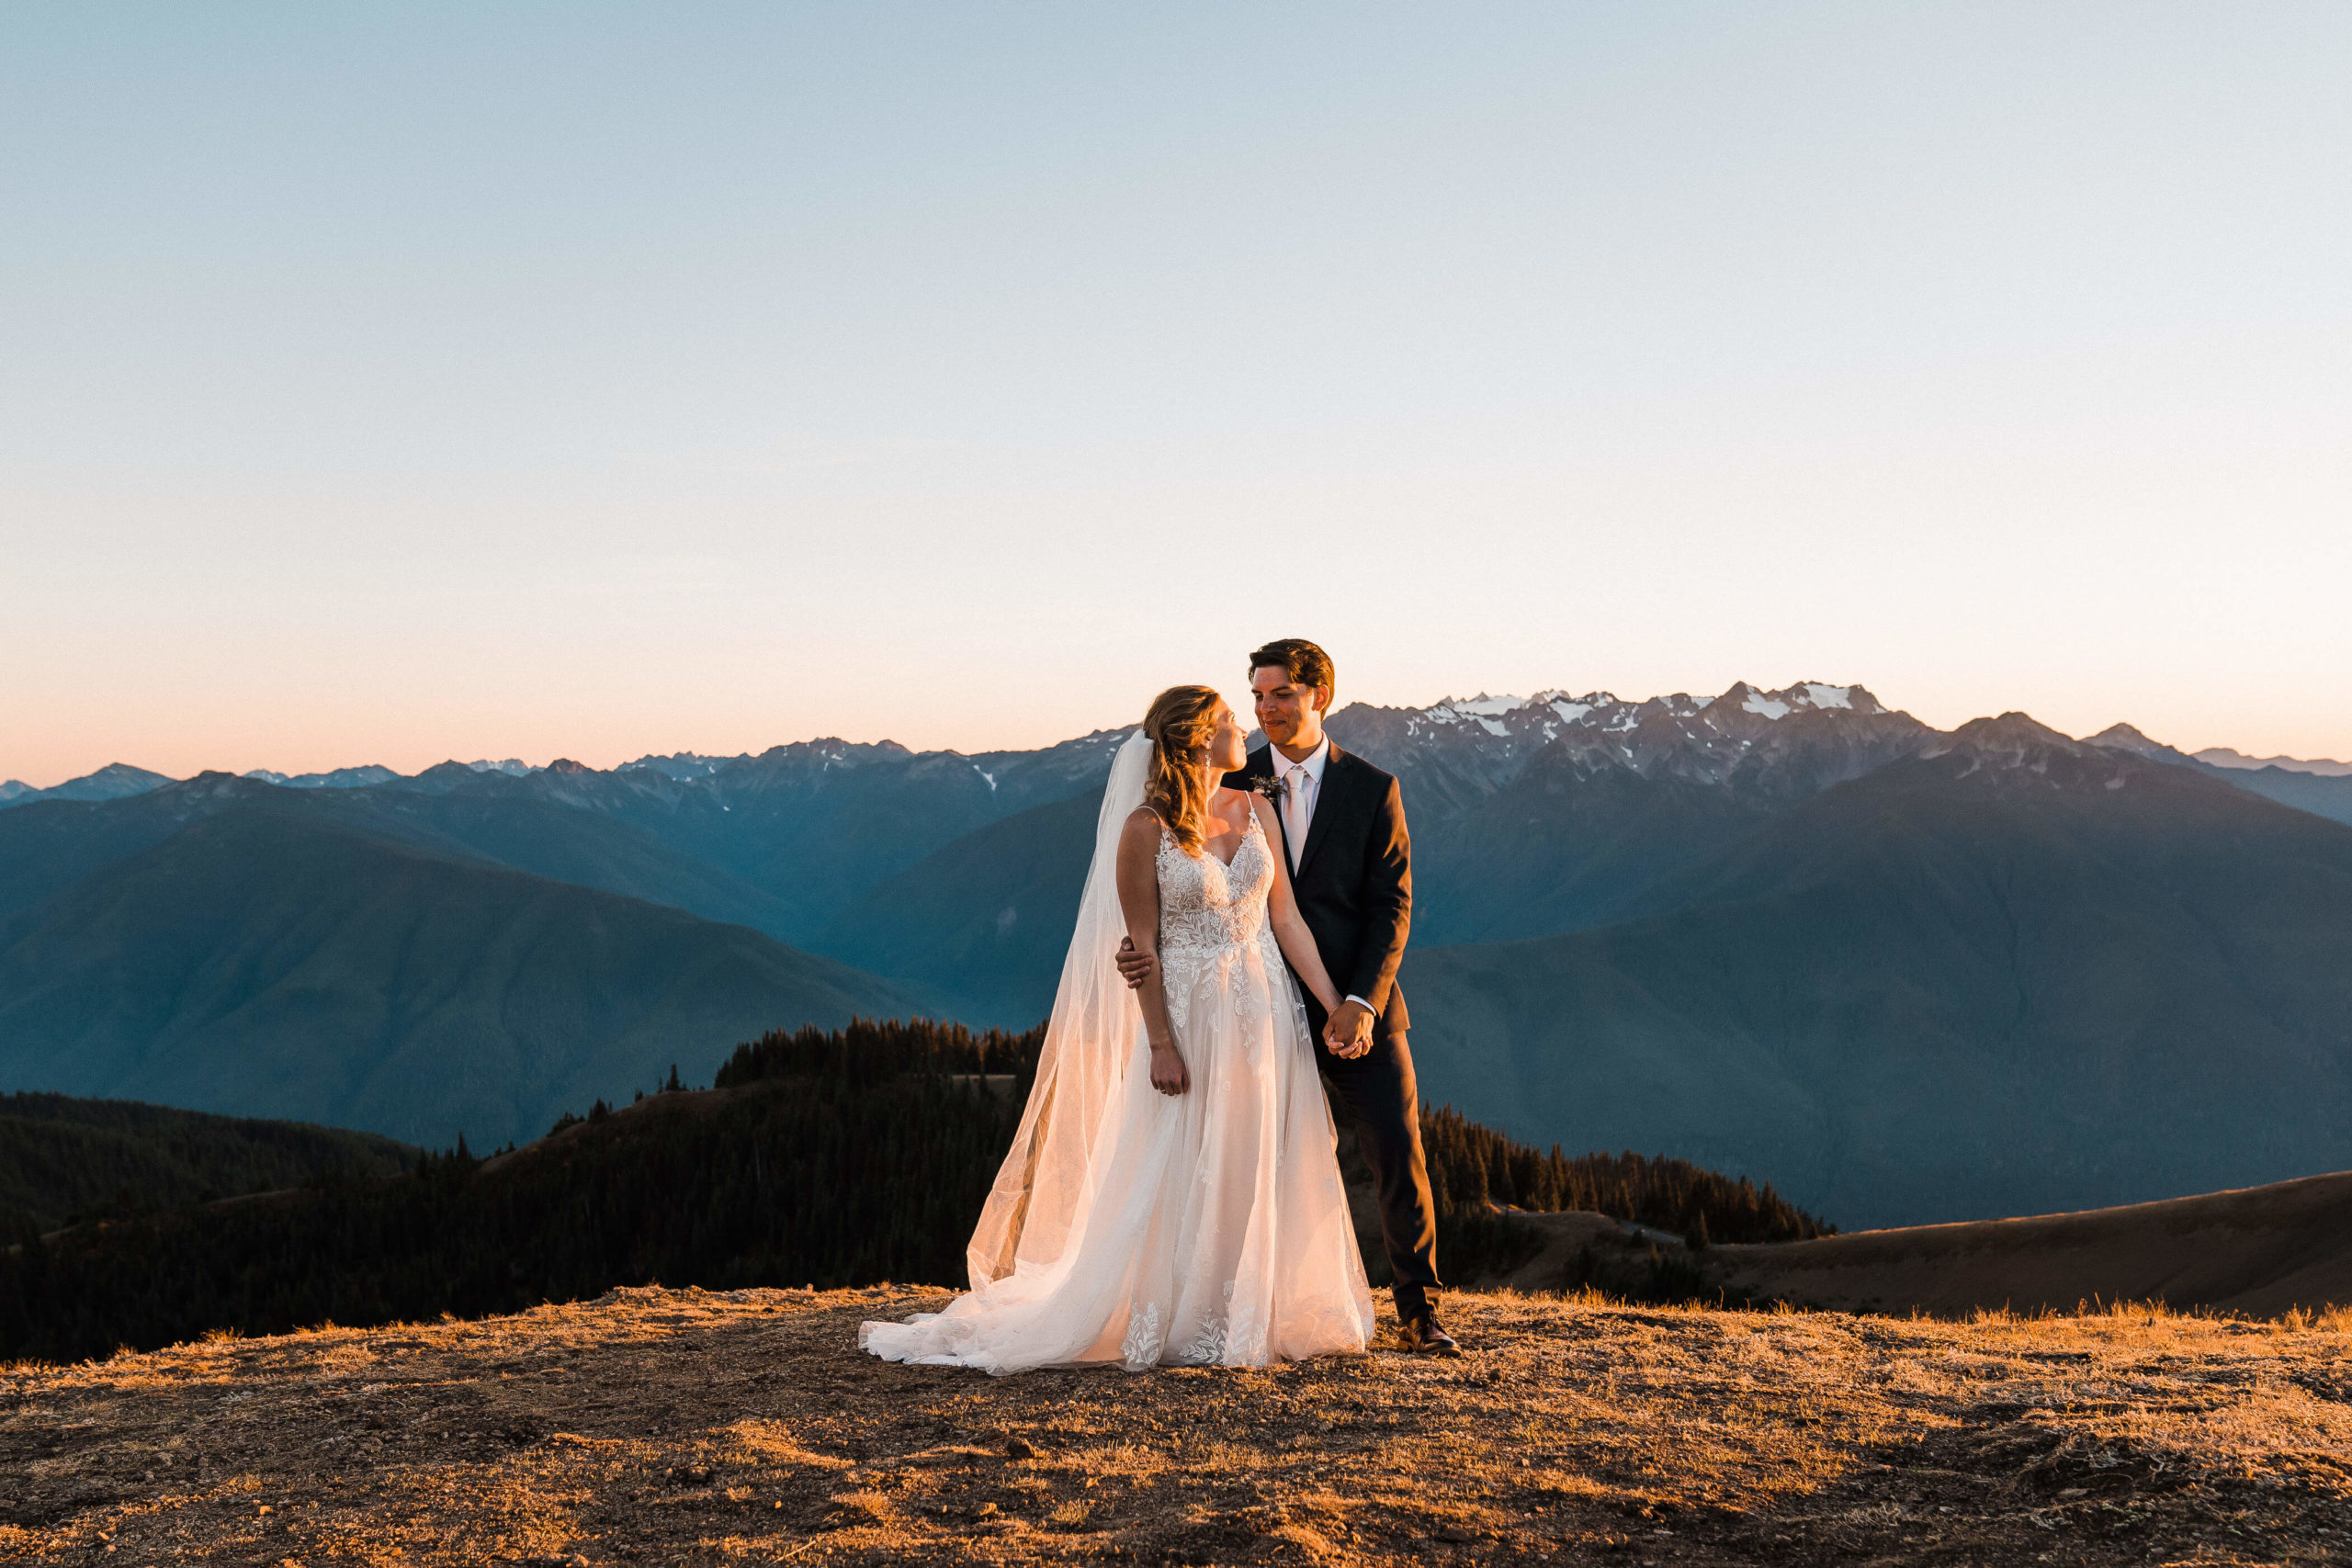 Bride and groom portraits at a national park wedding